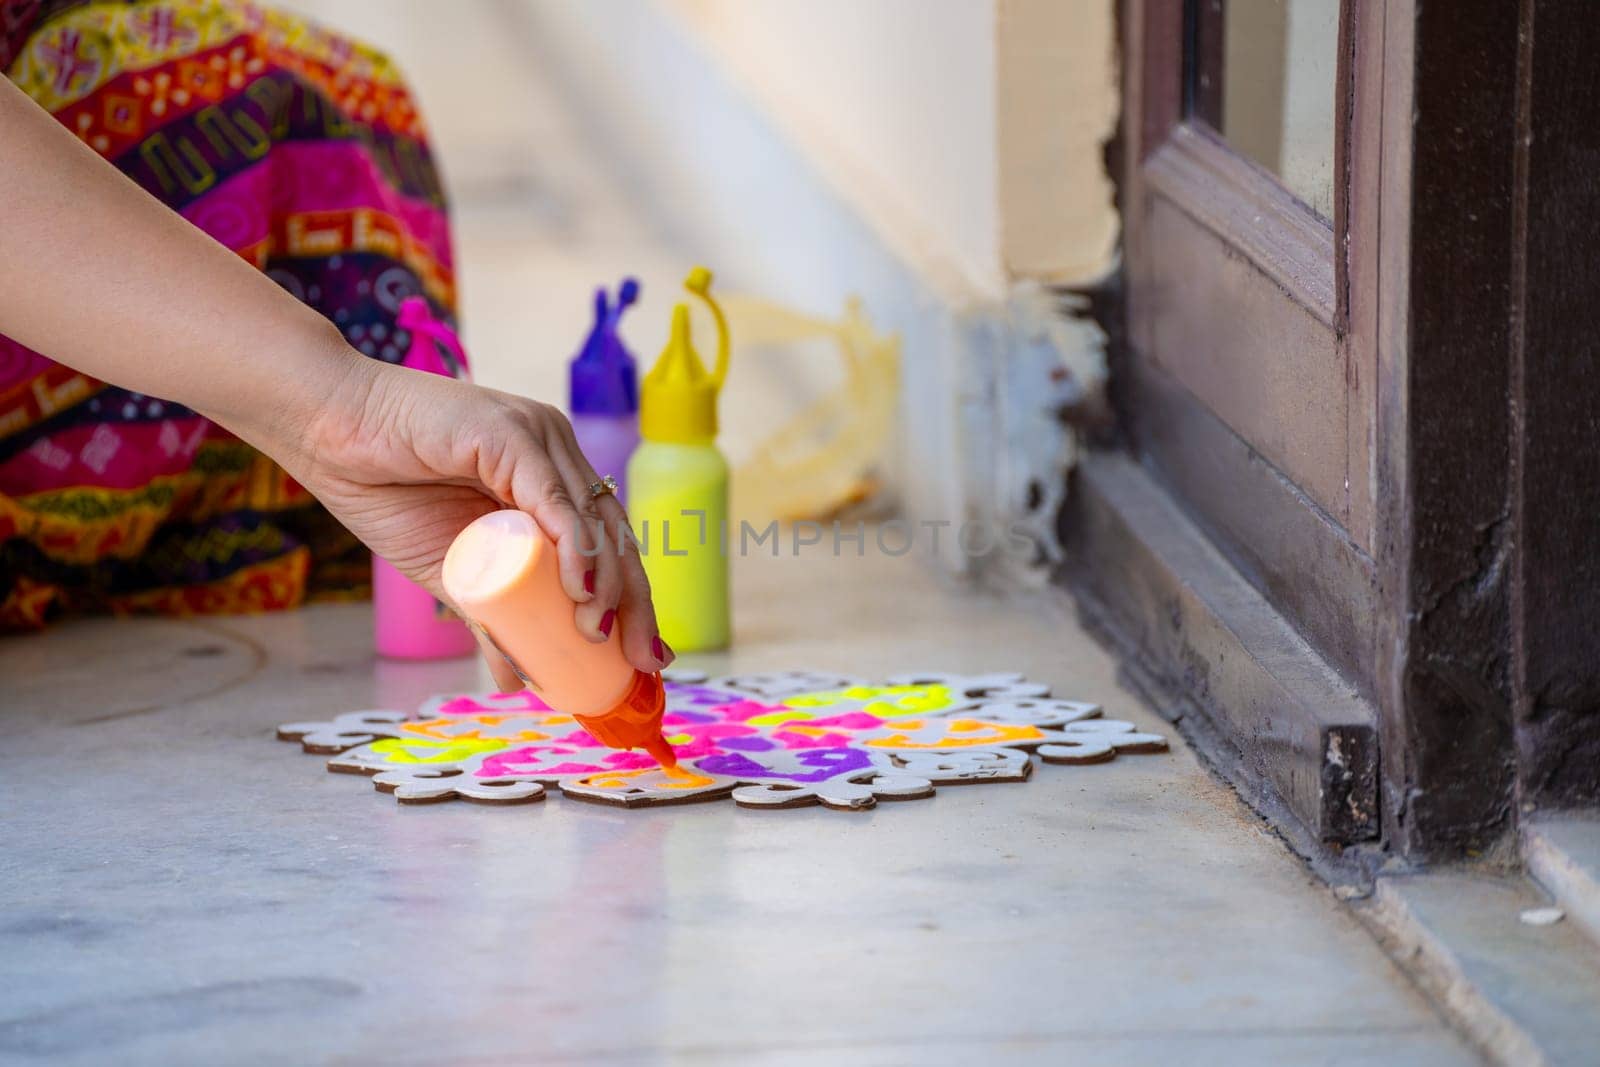 Indian woman in traditional indian clothing using bottles of color powder to make rangoli a traditional art made on floors during festivals of diwali, dussera, onam in hindu culture by Shalinimathur